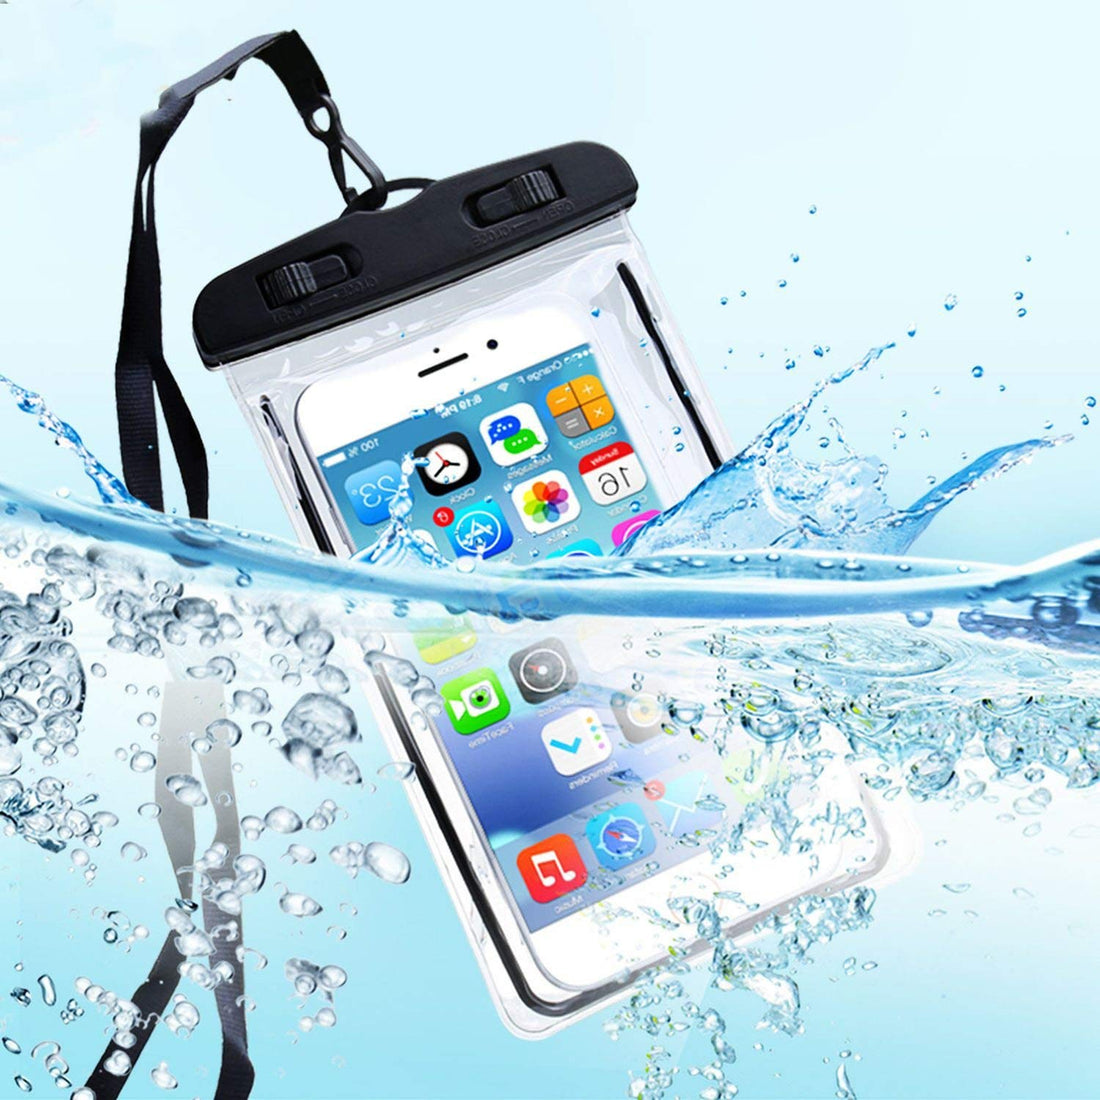 Universal Waterproof Smartphone Protective Pouch with Button Lock, Black, Pack Of 1